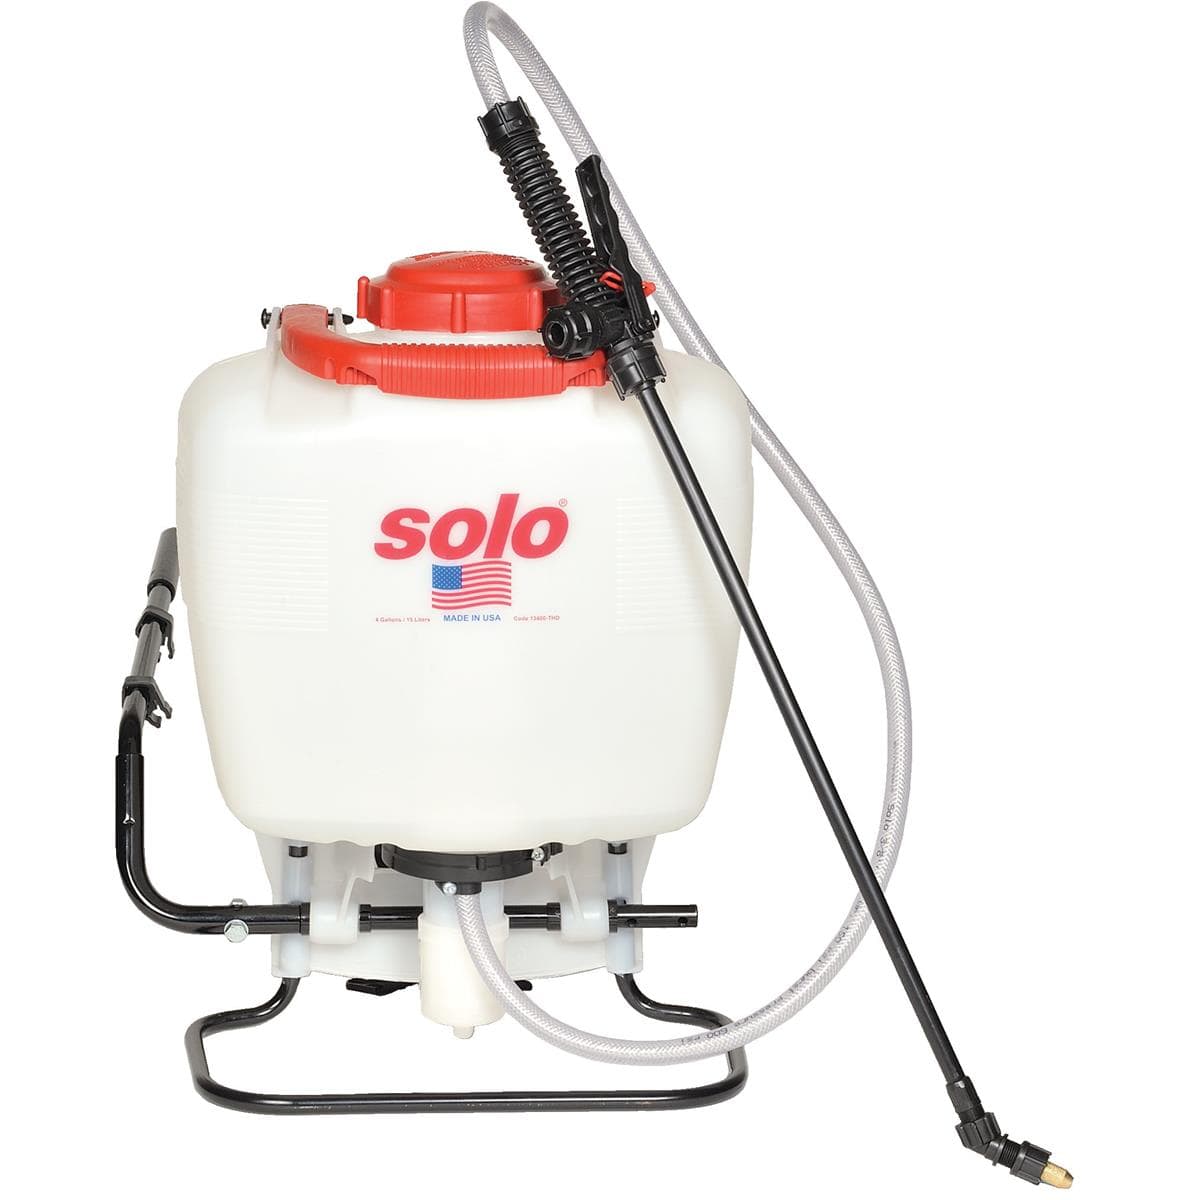 Deluxe 4-gal. Backpack Sprayer with Piston Pump